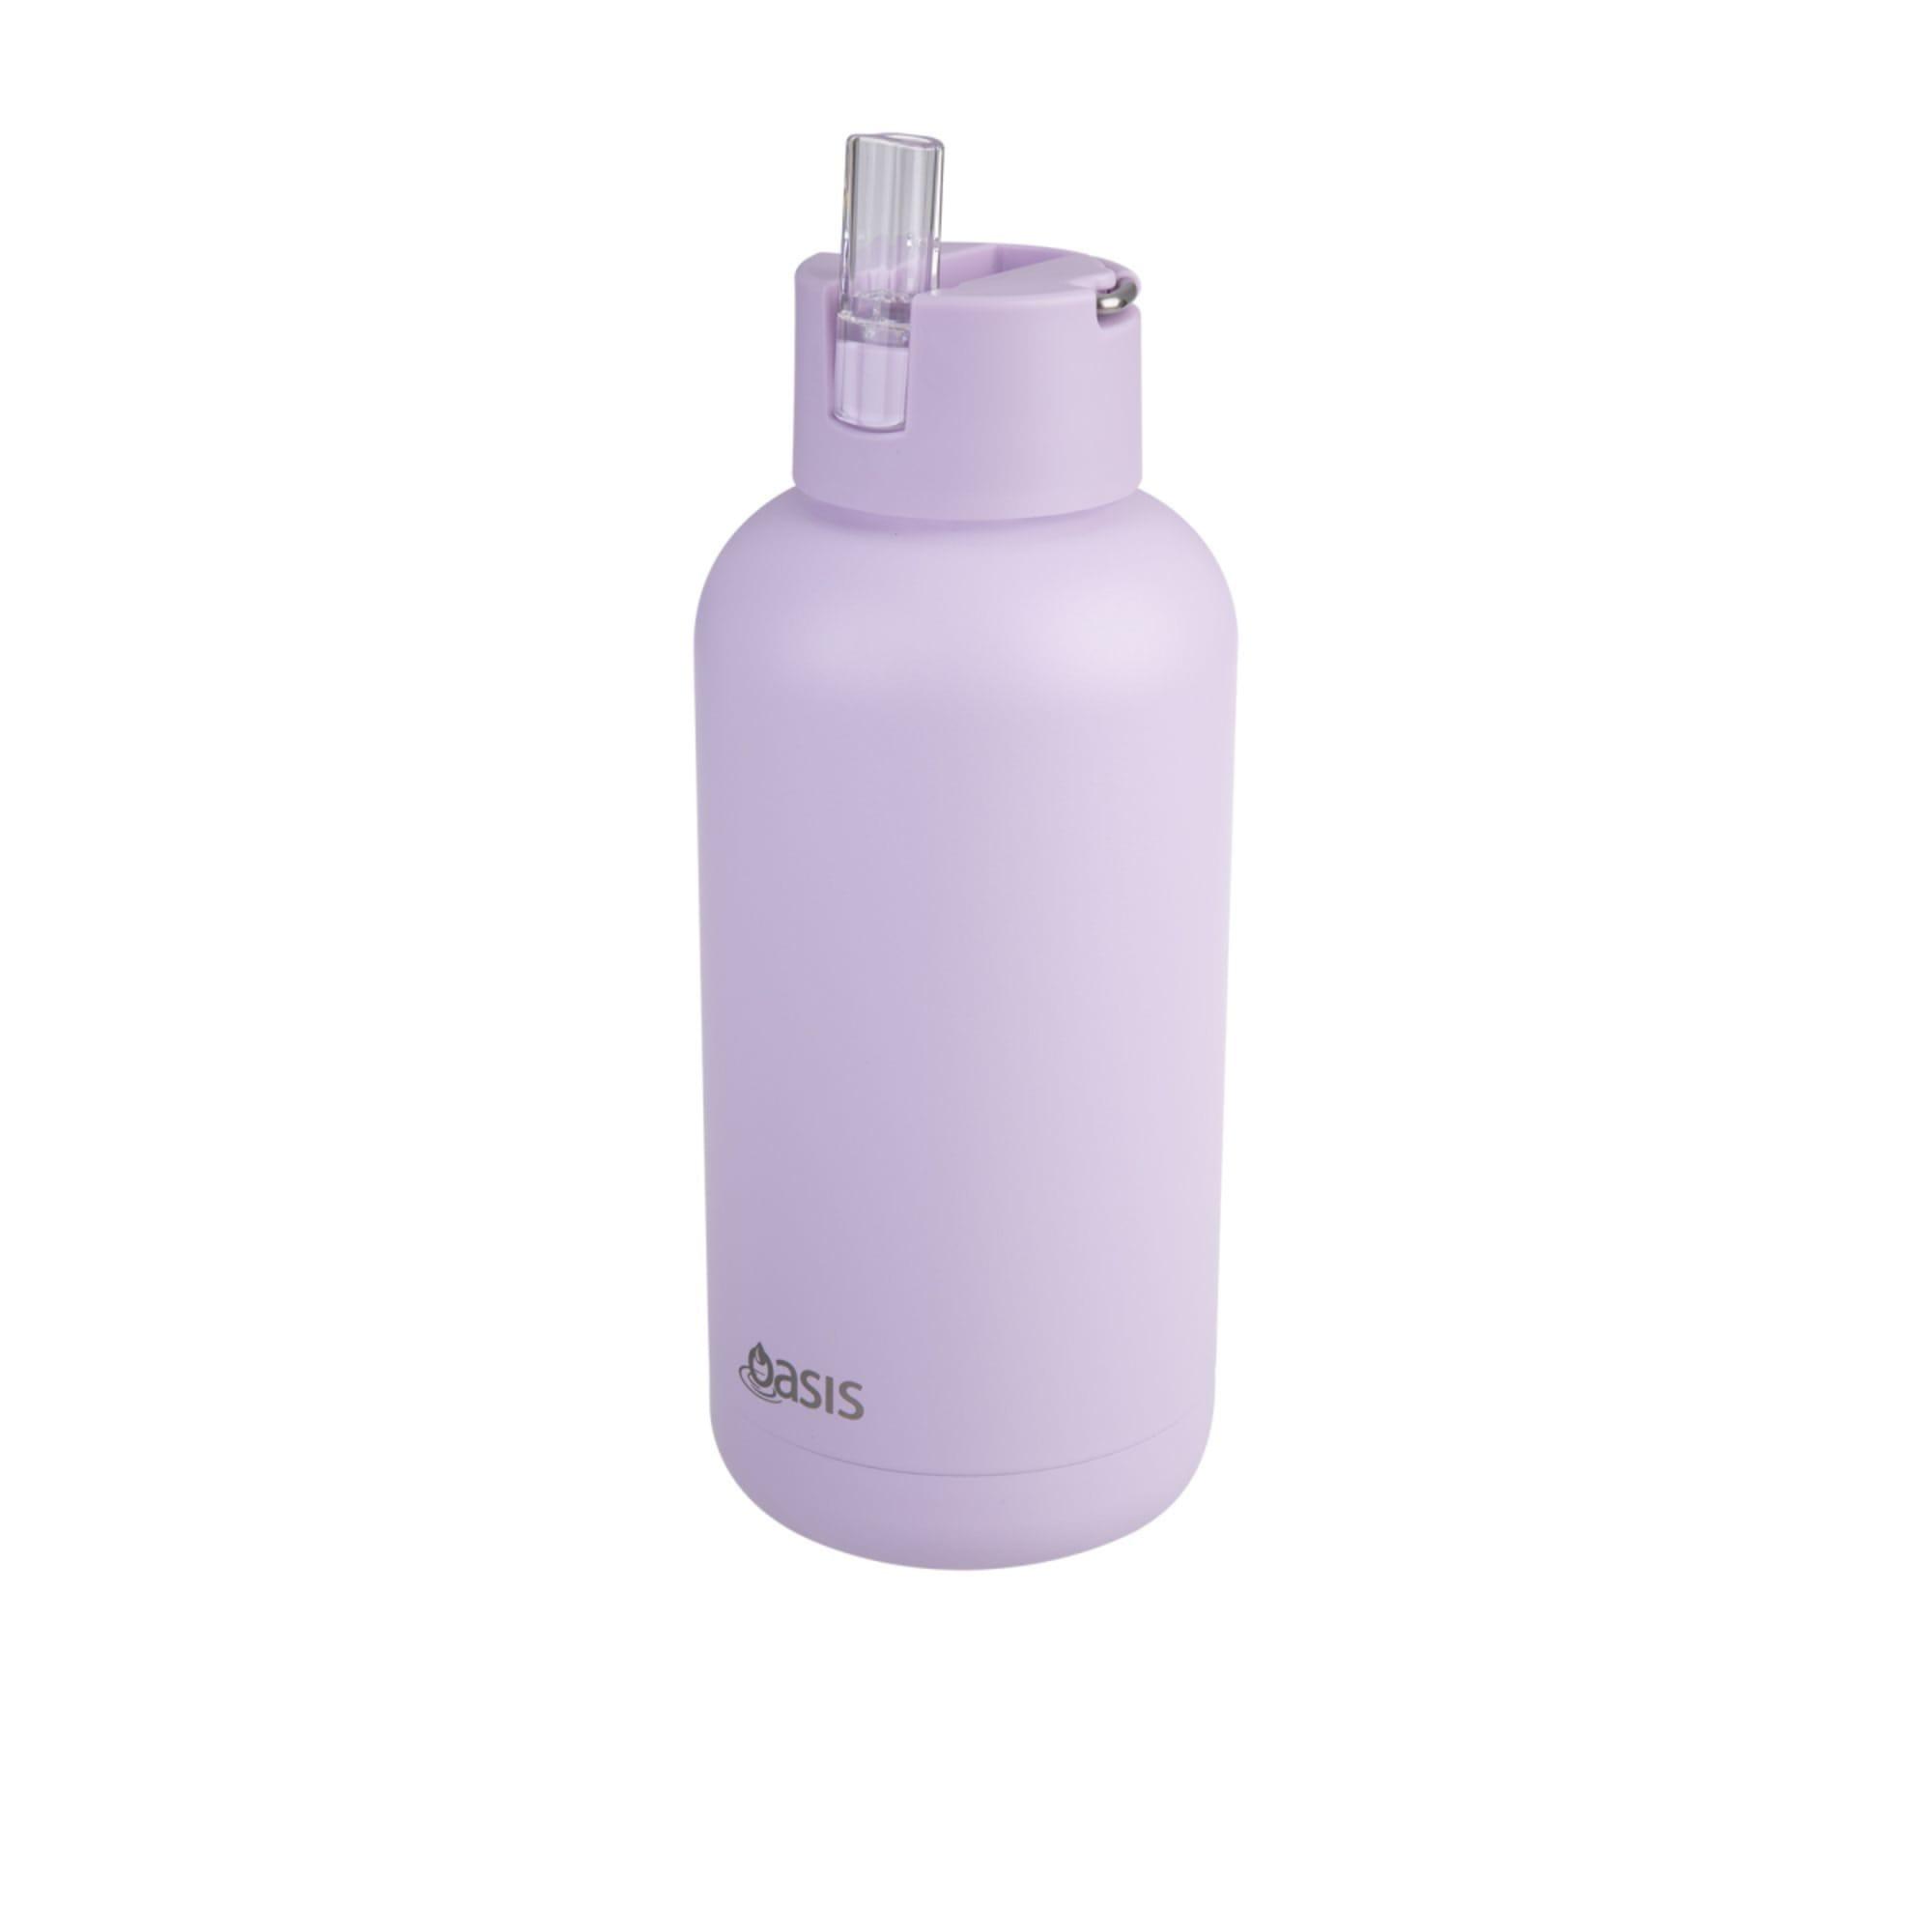 Oasis Moda Triple Wall Insulated Drink Bottle 1.5L Orchid Image 5